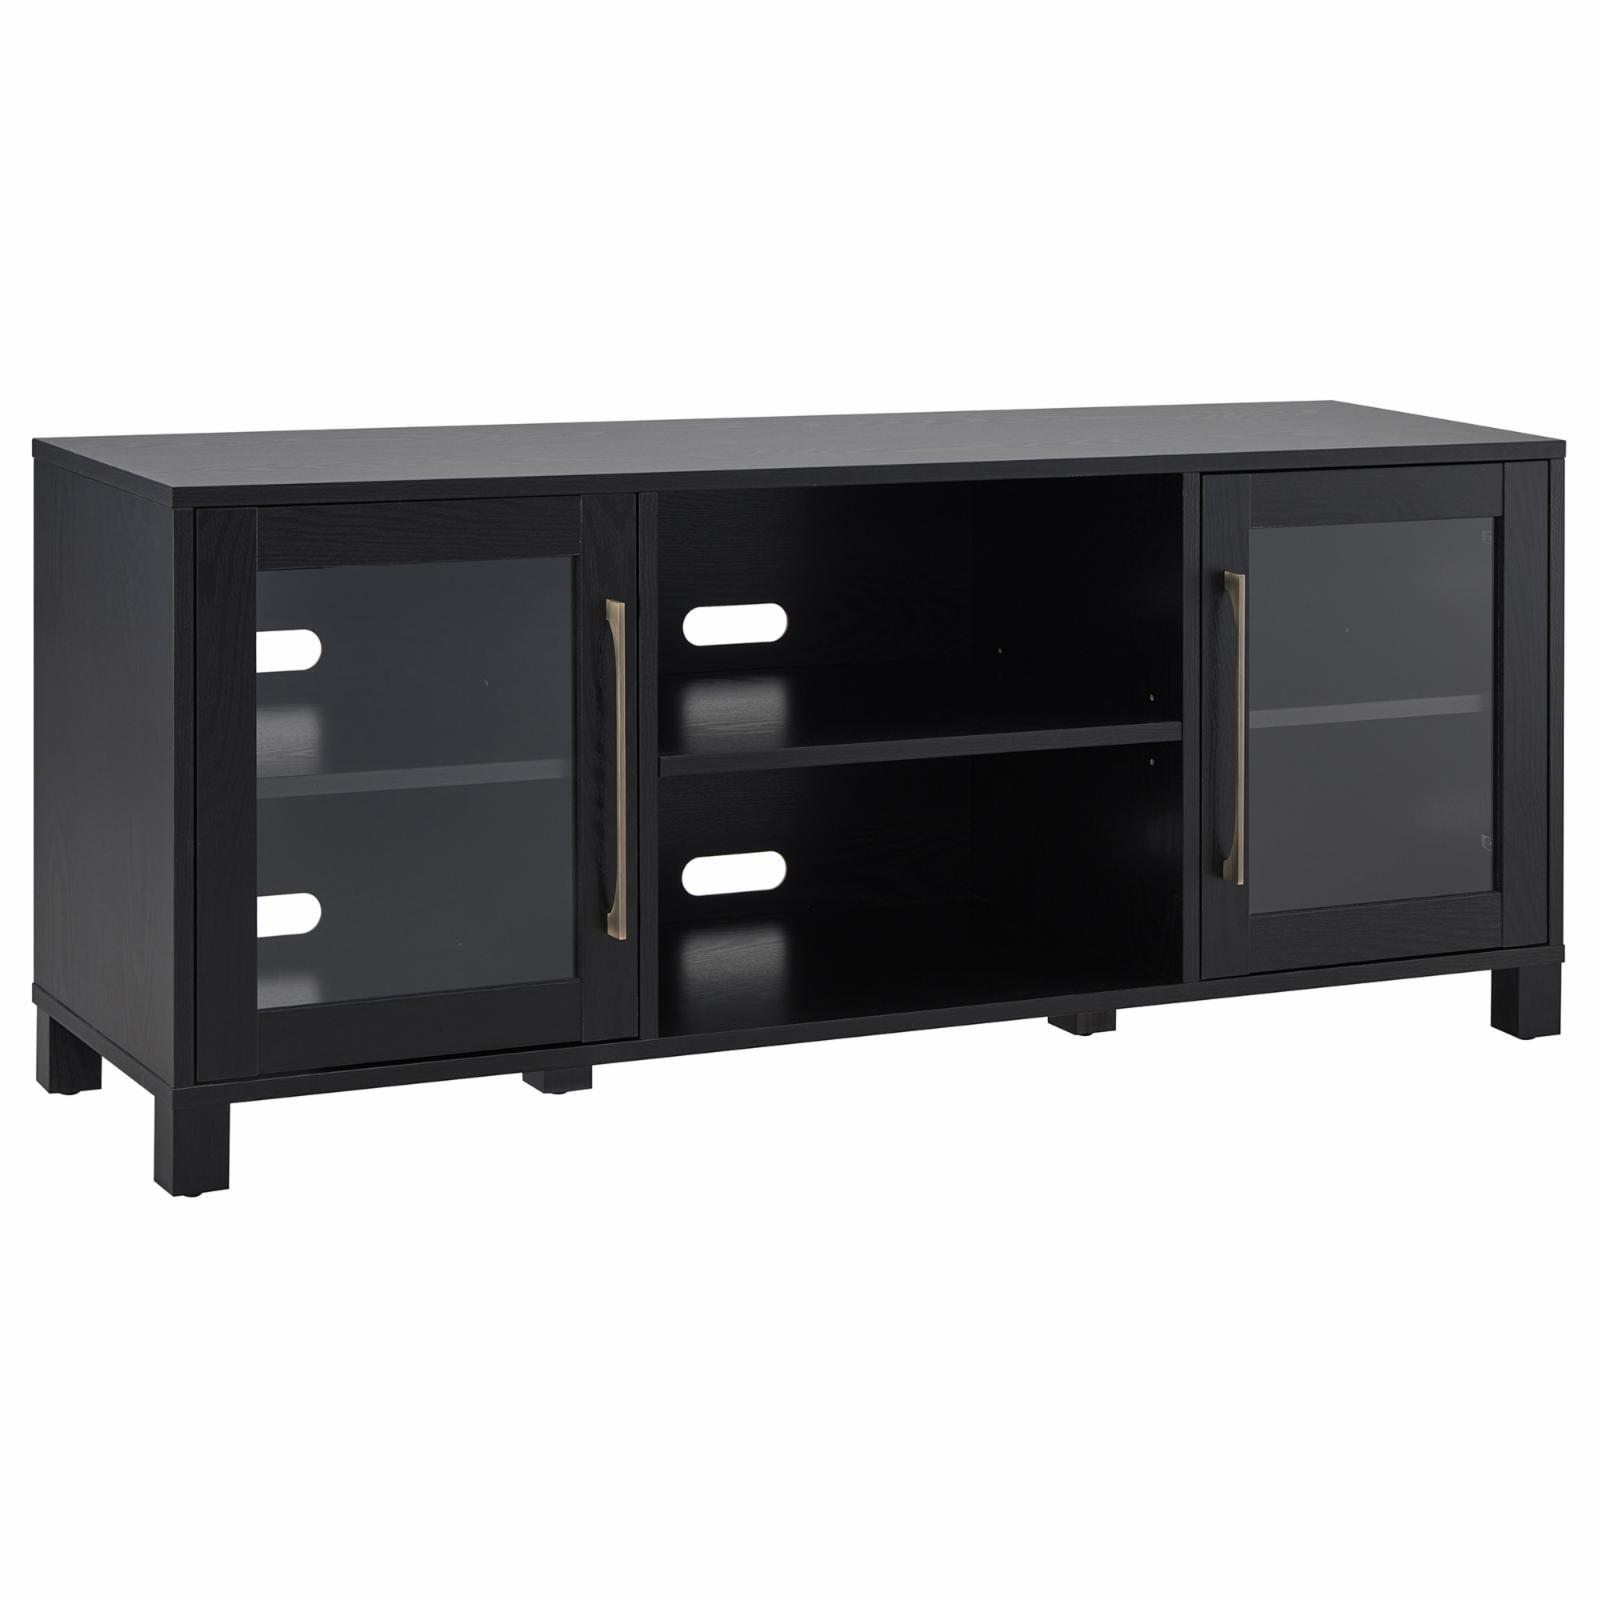 Quincy Black Grain 58" Classic TV Stand with Enclosed Cabinets